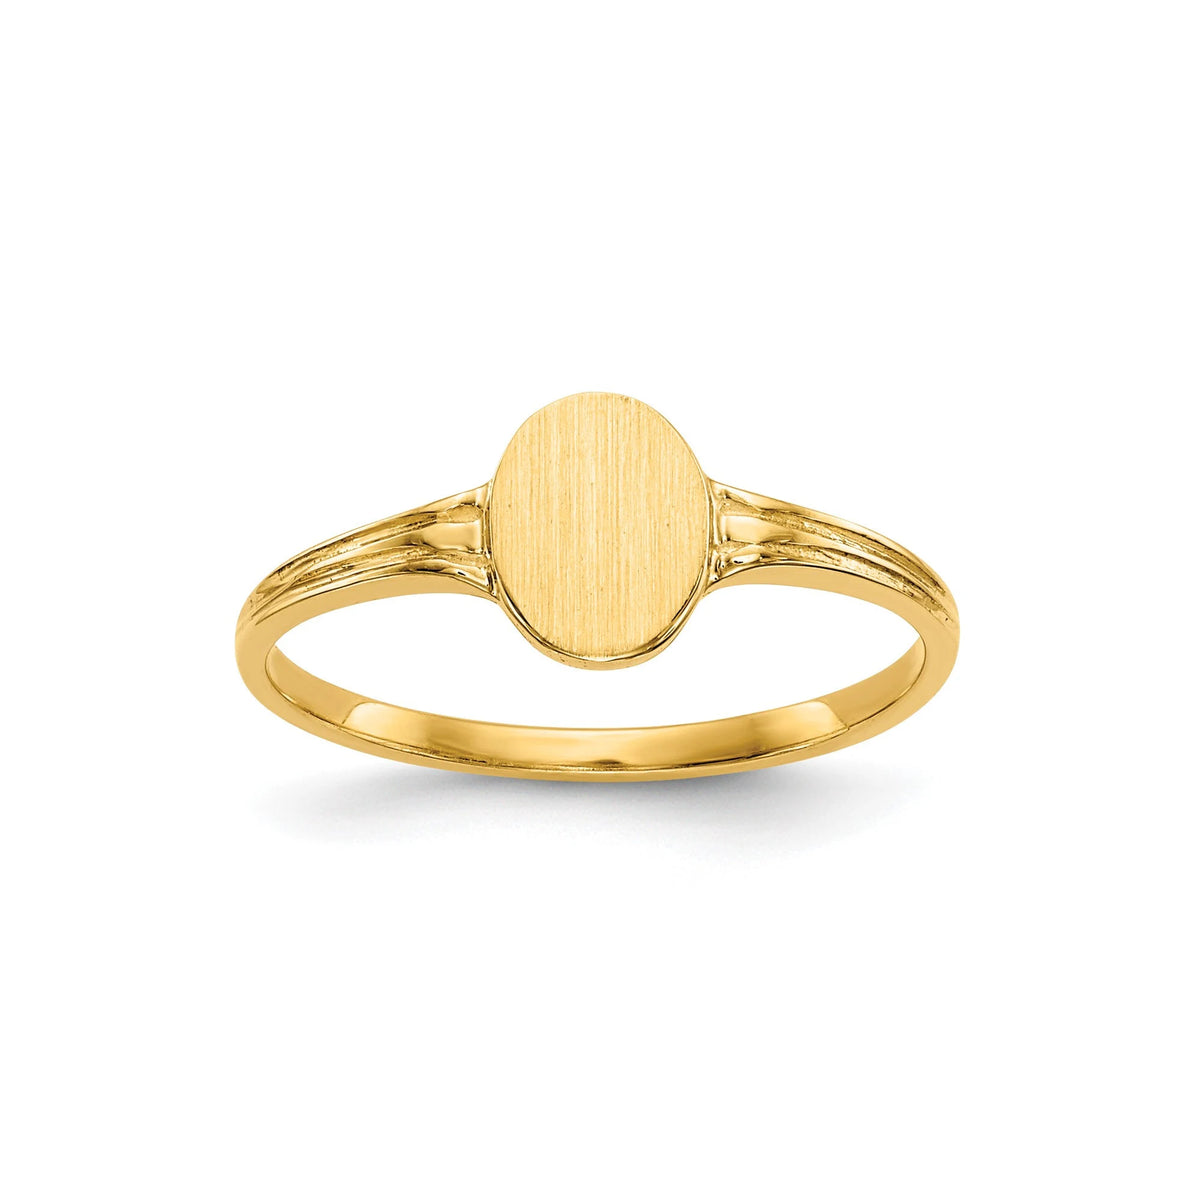 Genuine 14k Yellow Gold Signet Ring Baby to Toddler / Band Size 1- 4 (1-5 year olds) Toddler Size Children's Ring Band